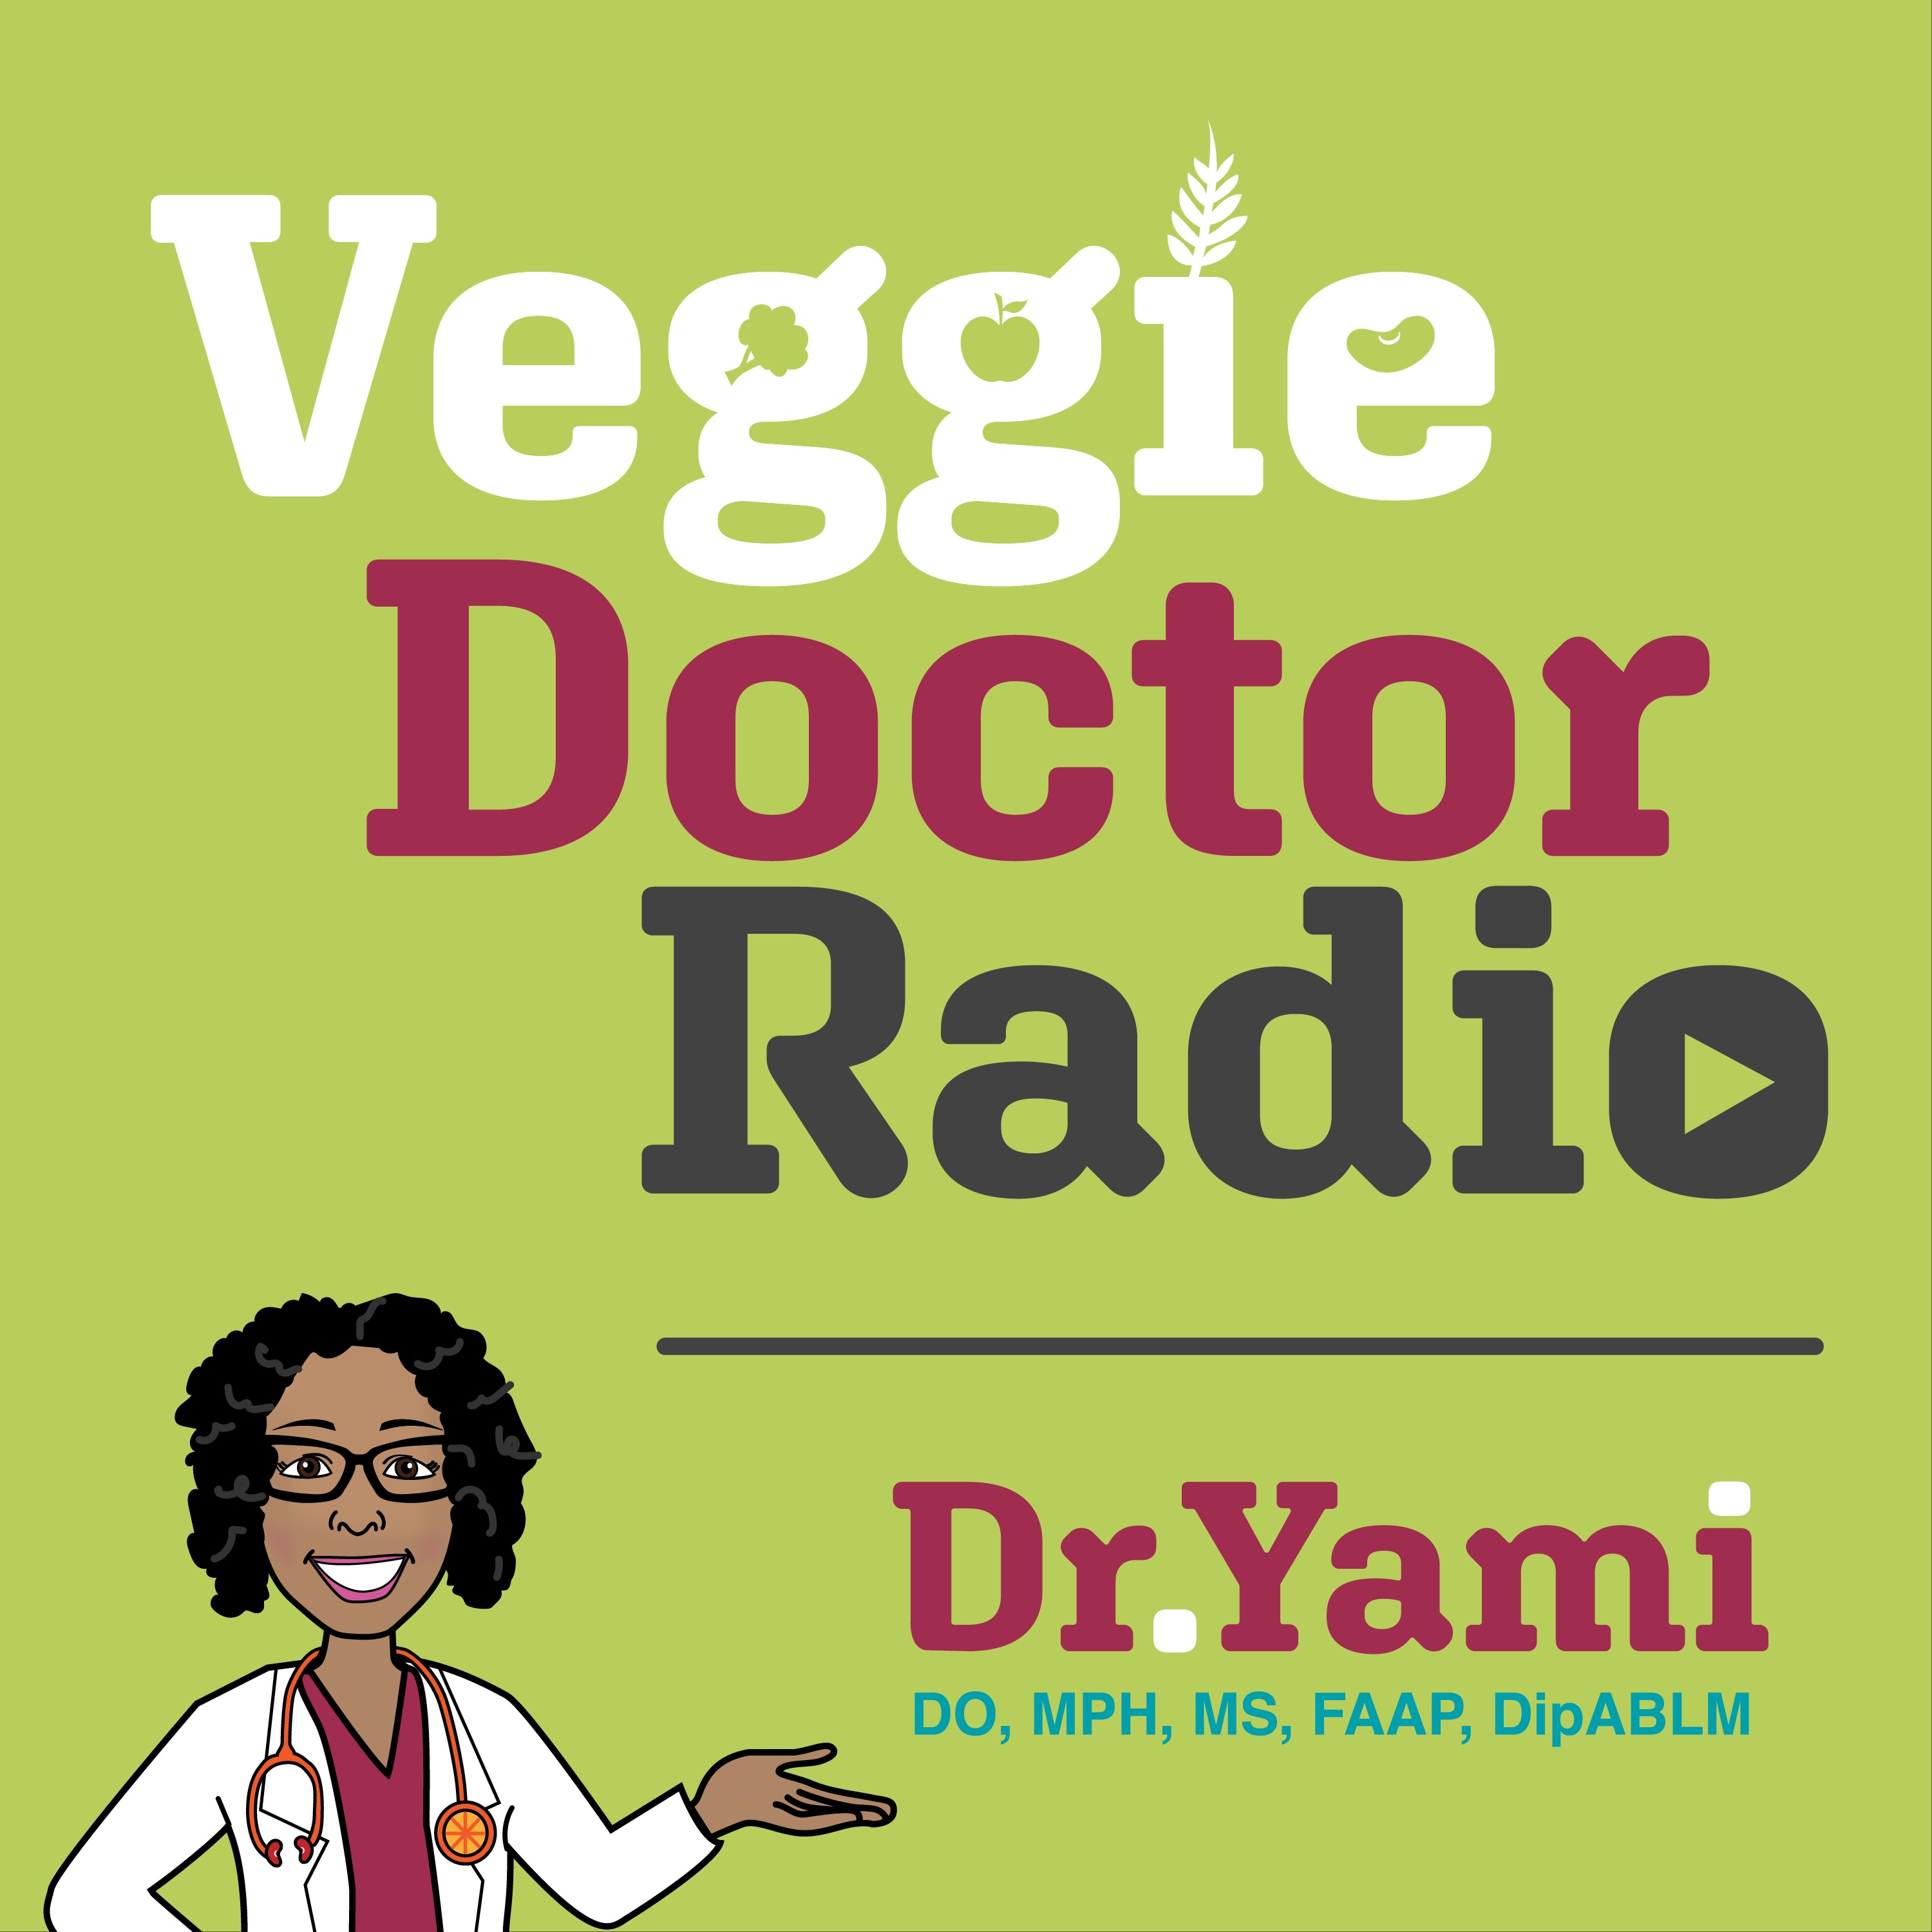 257: Why I started practicing time-restricted eating and intermittent fasting; Fasting Series (Veggie Doctor Radio)